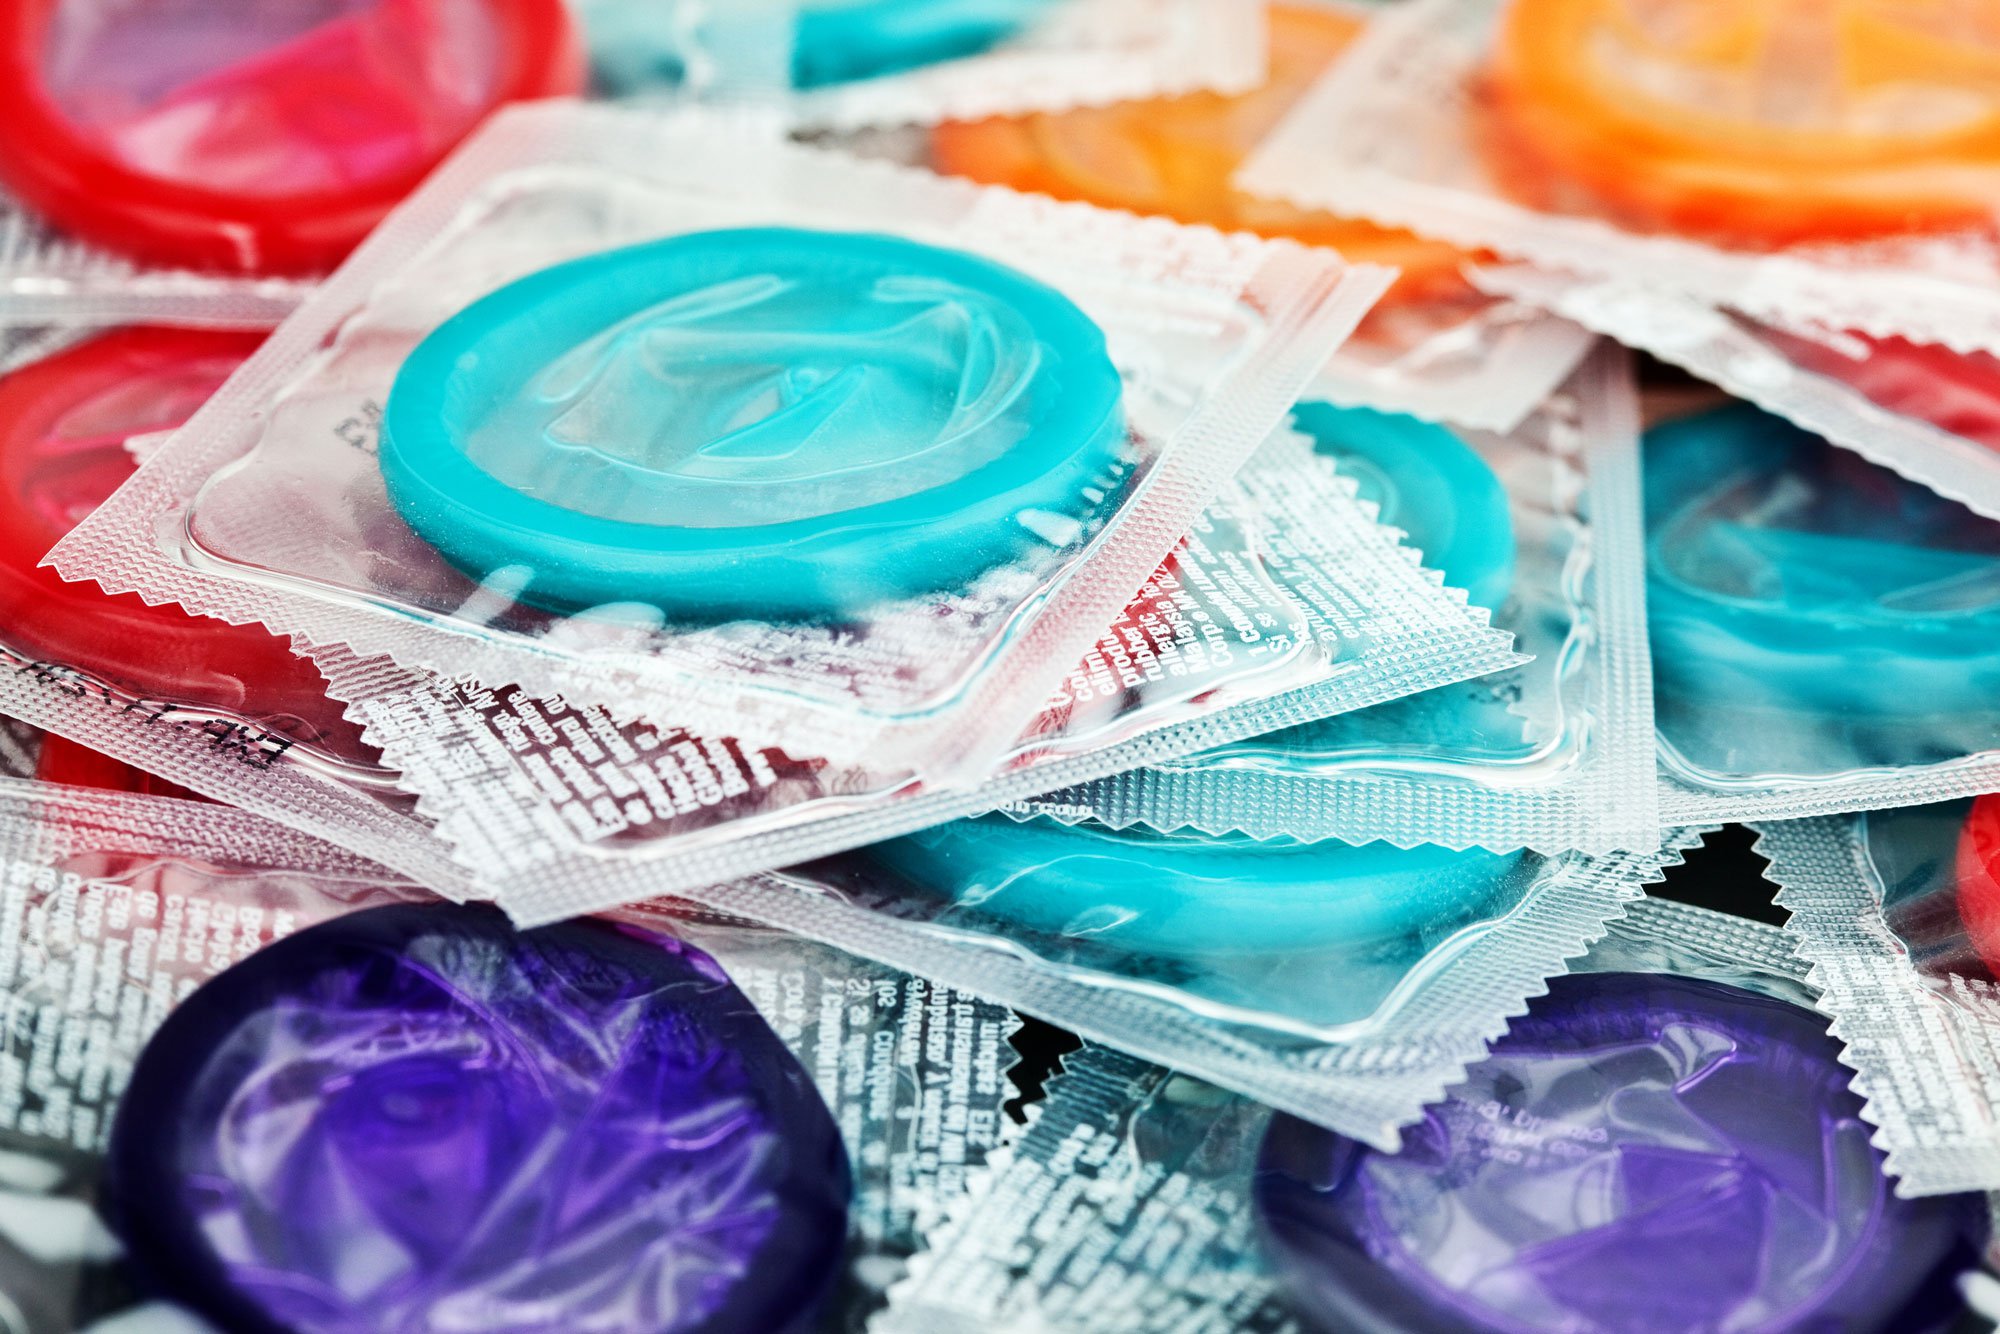 Everything you always wanted to know about condoms One Medical photo